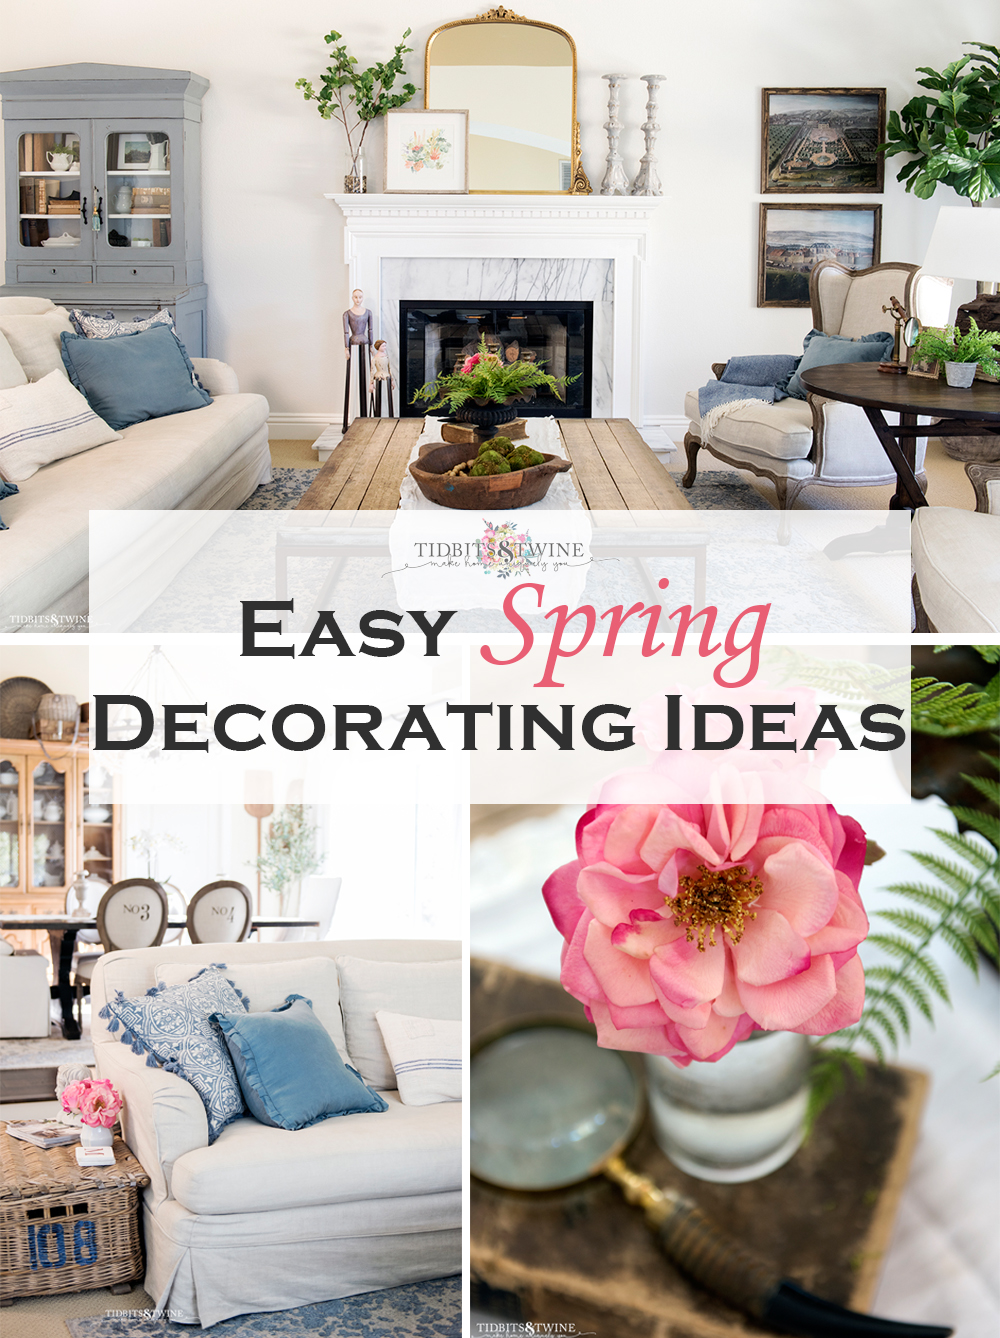 Collage of living room and text saying easy spring decorating ideas